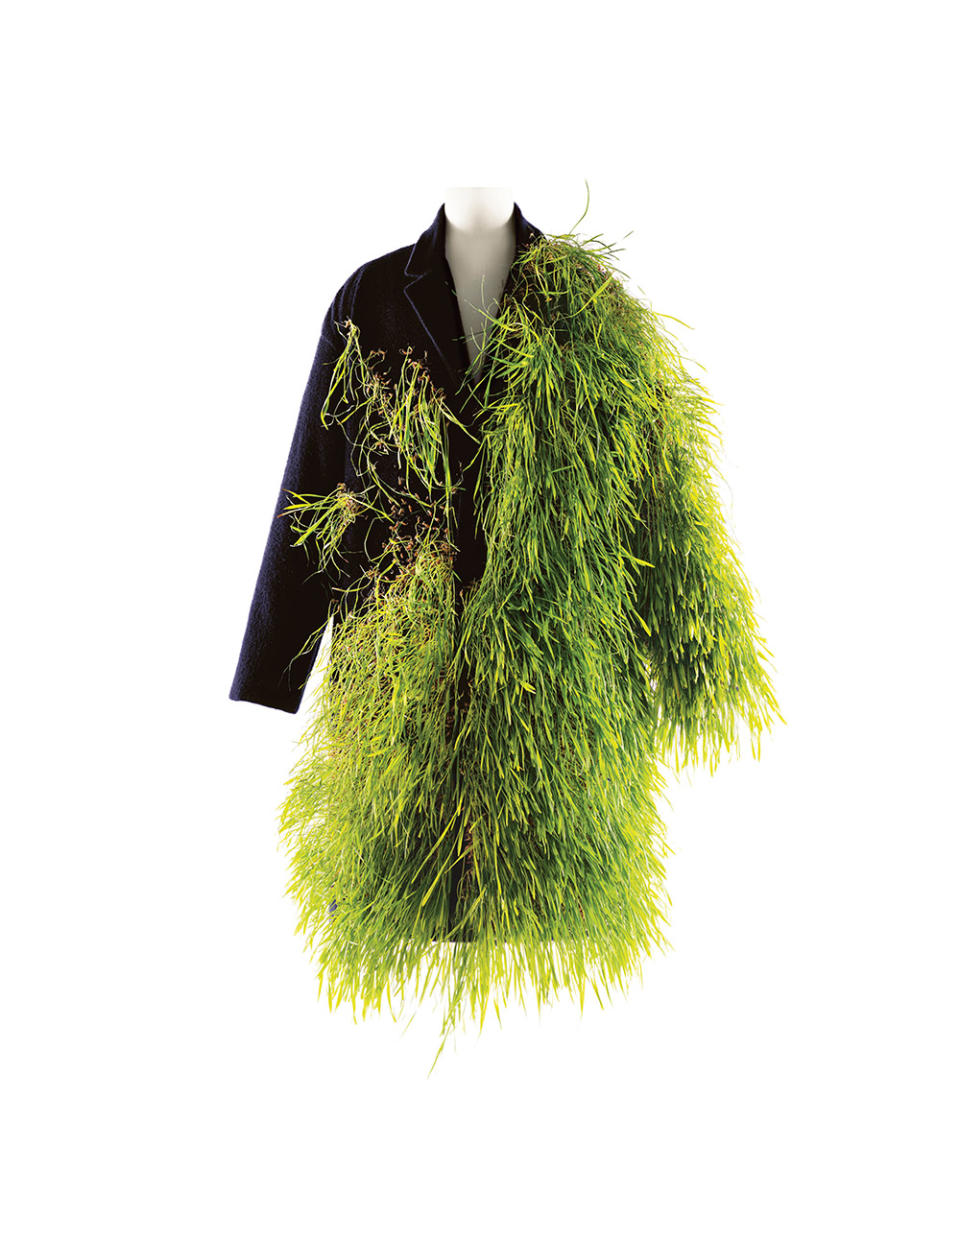 Grass-embellished coat by Jonathan Anderson for Loewe’s Spring/Summer 2023 menswear collection